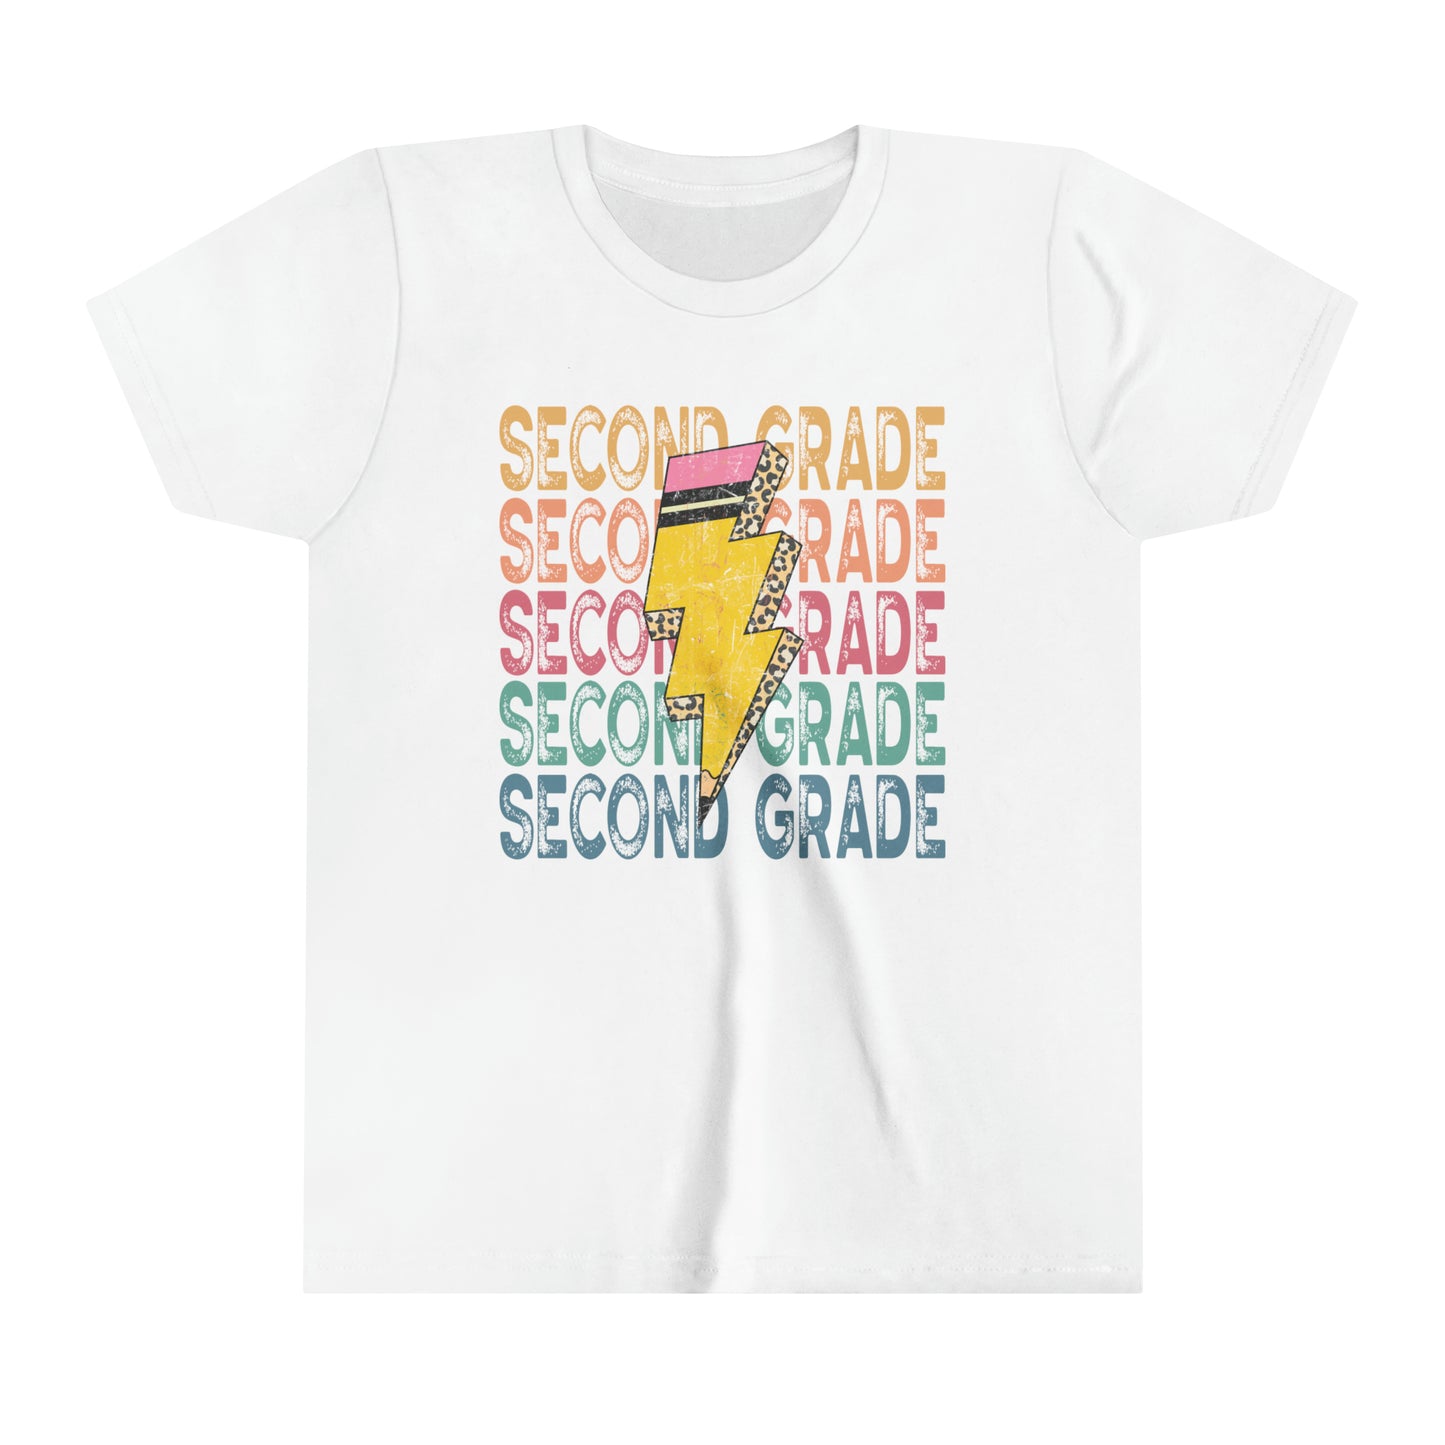 Second Grade Girl's Youth Short Sleeve Tee